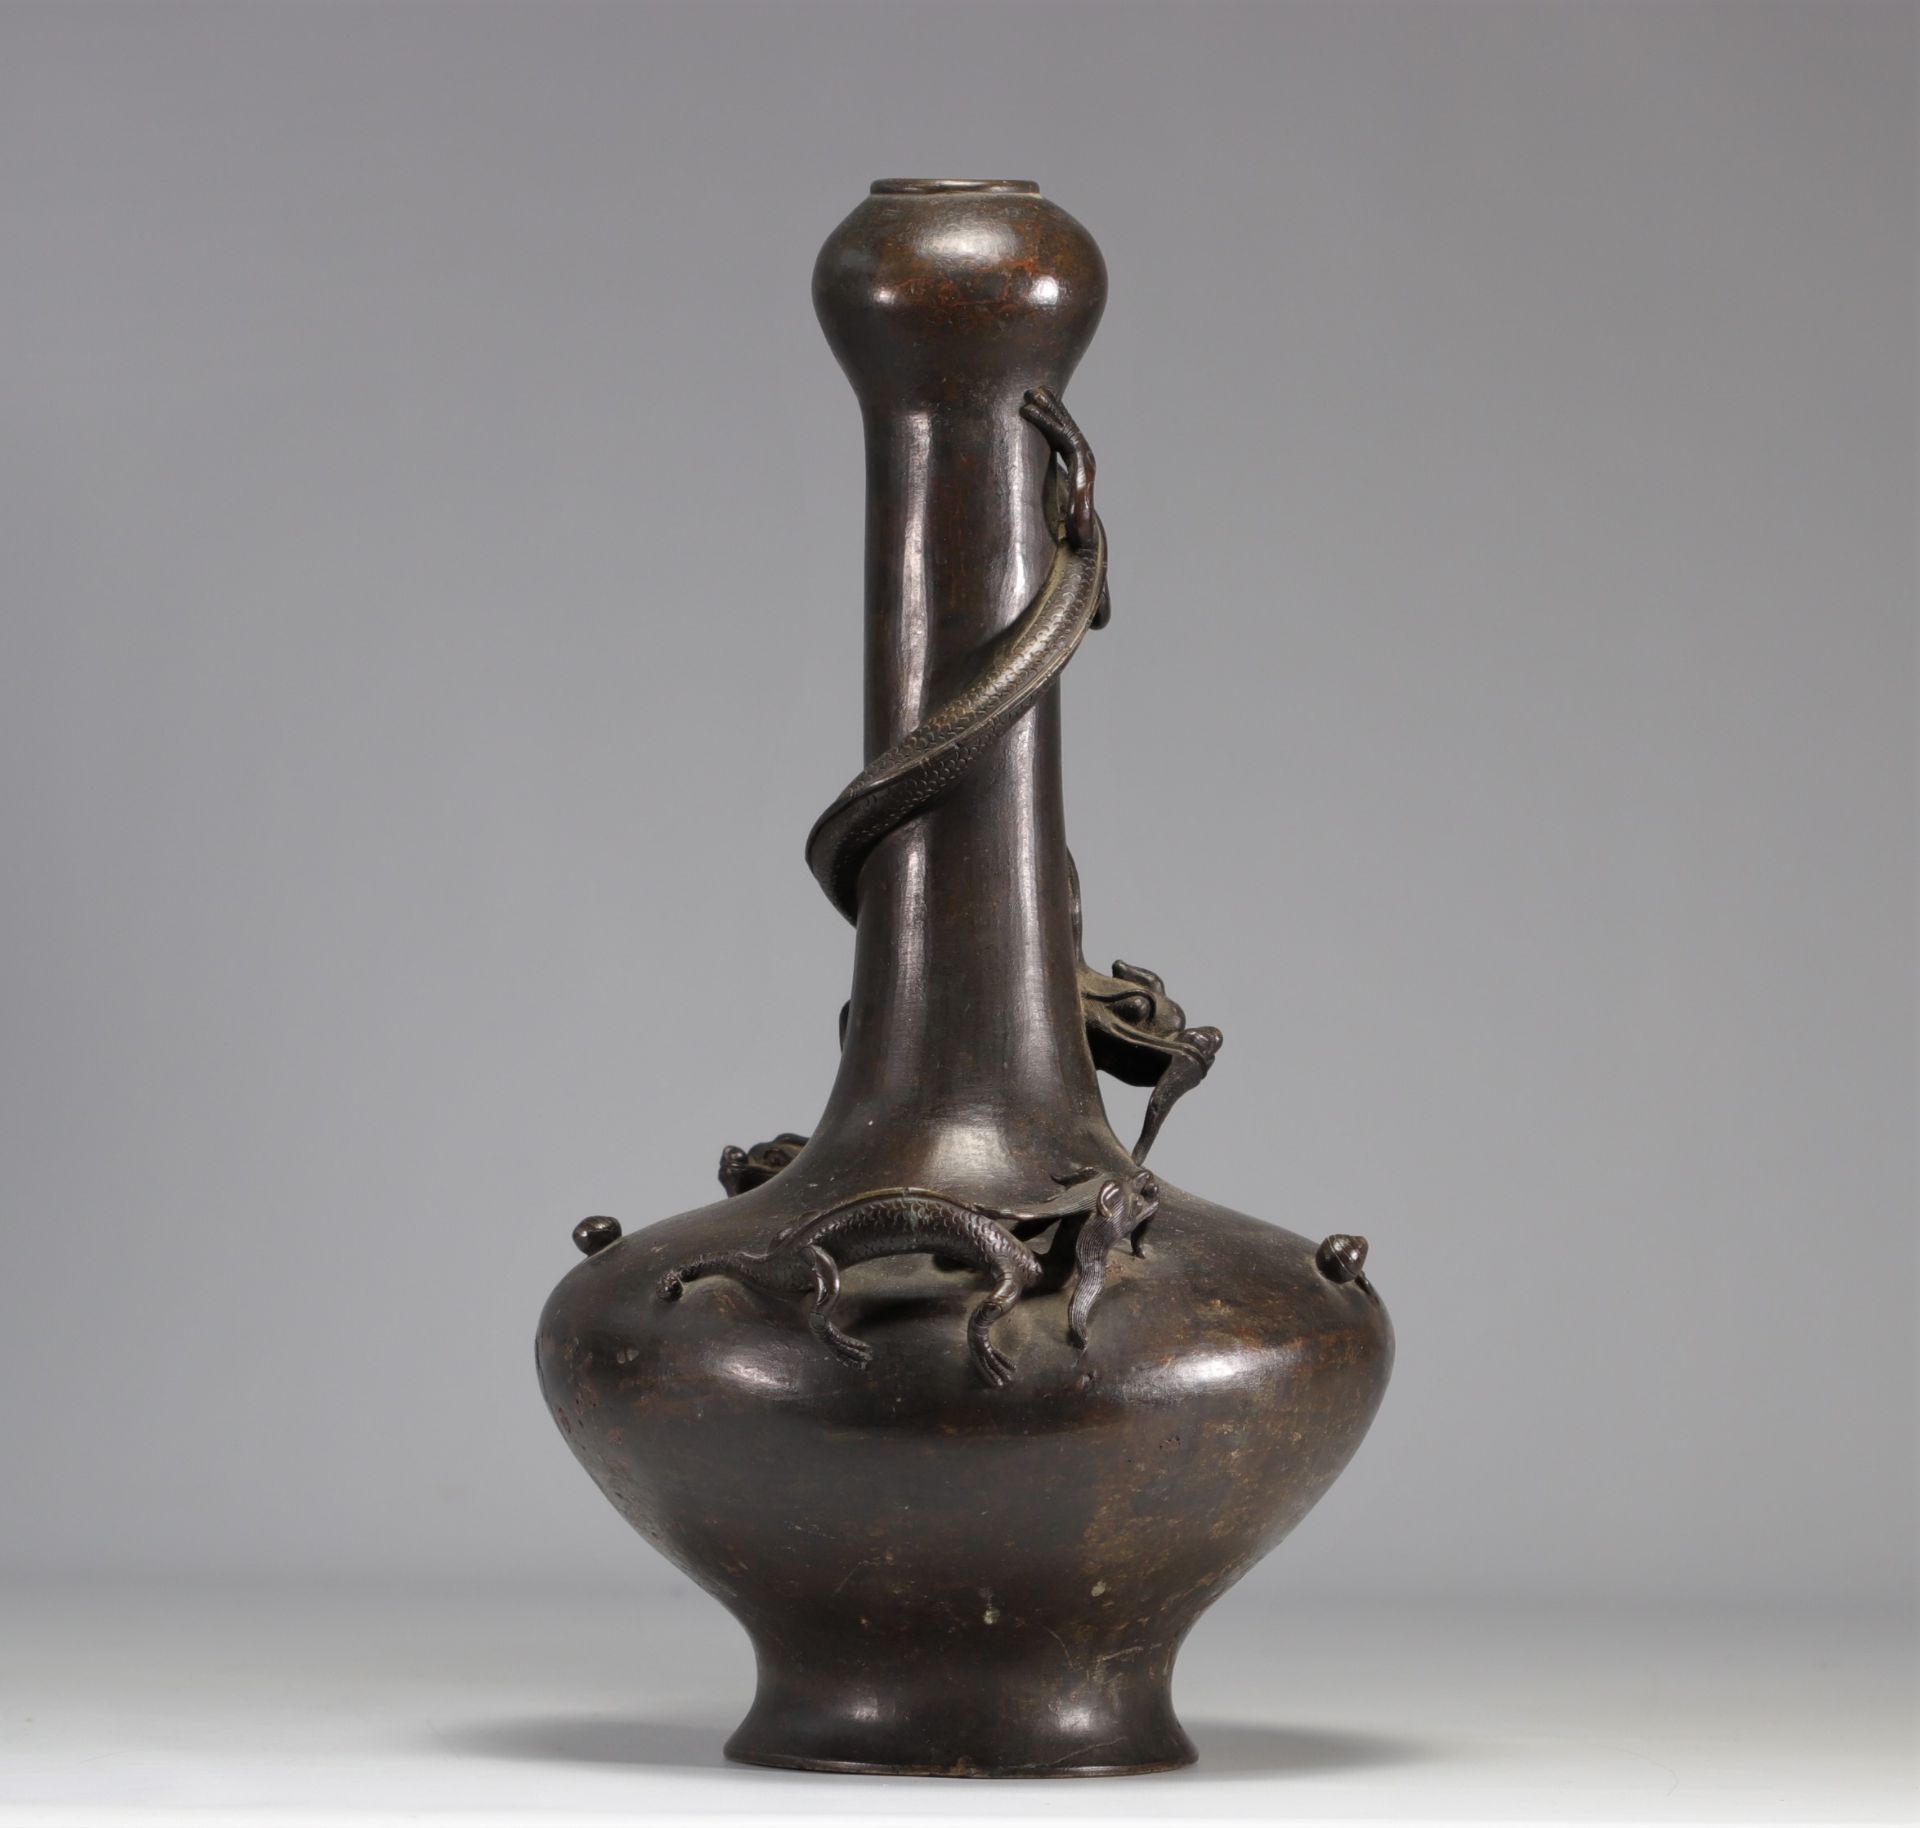 A Xuande Nian Zhi bronze bottle vase decorated with a Chilon from the Ming period (æ˜Žæœ) - Image 3 of 5